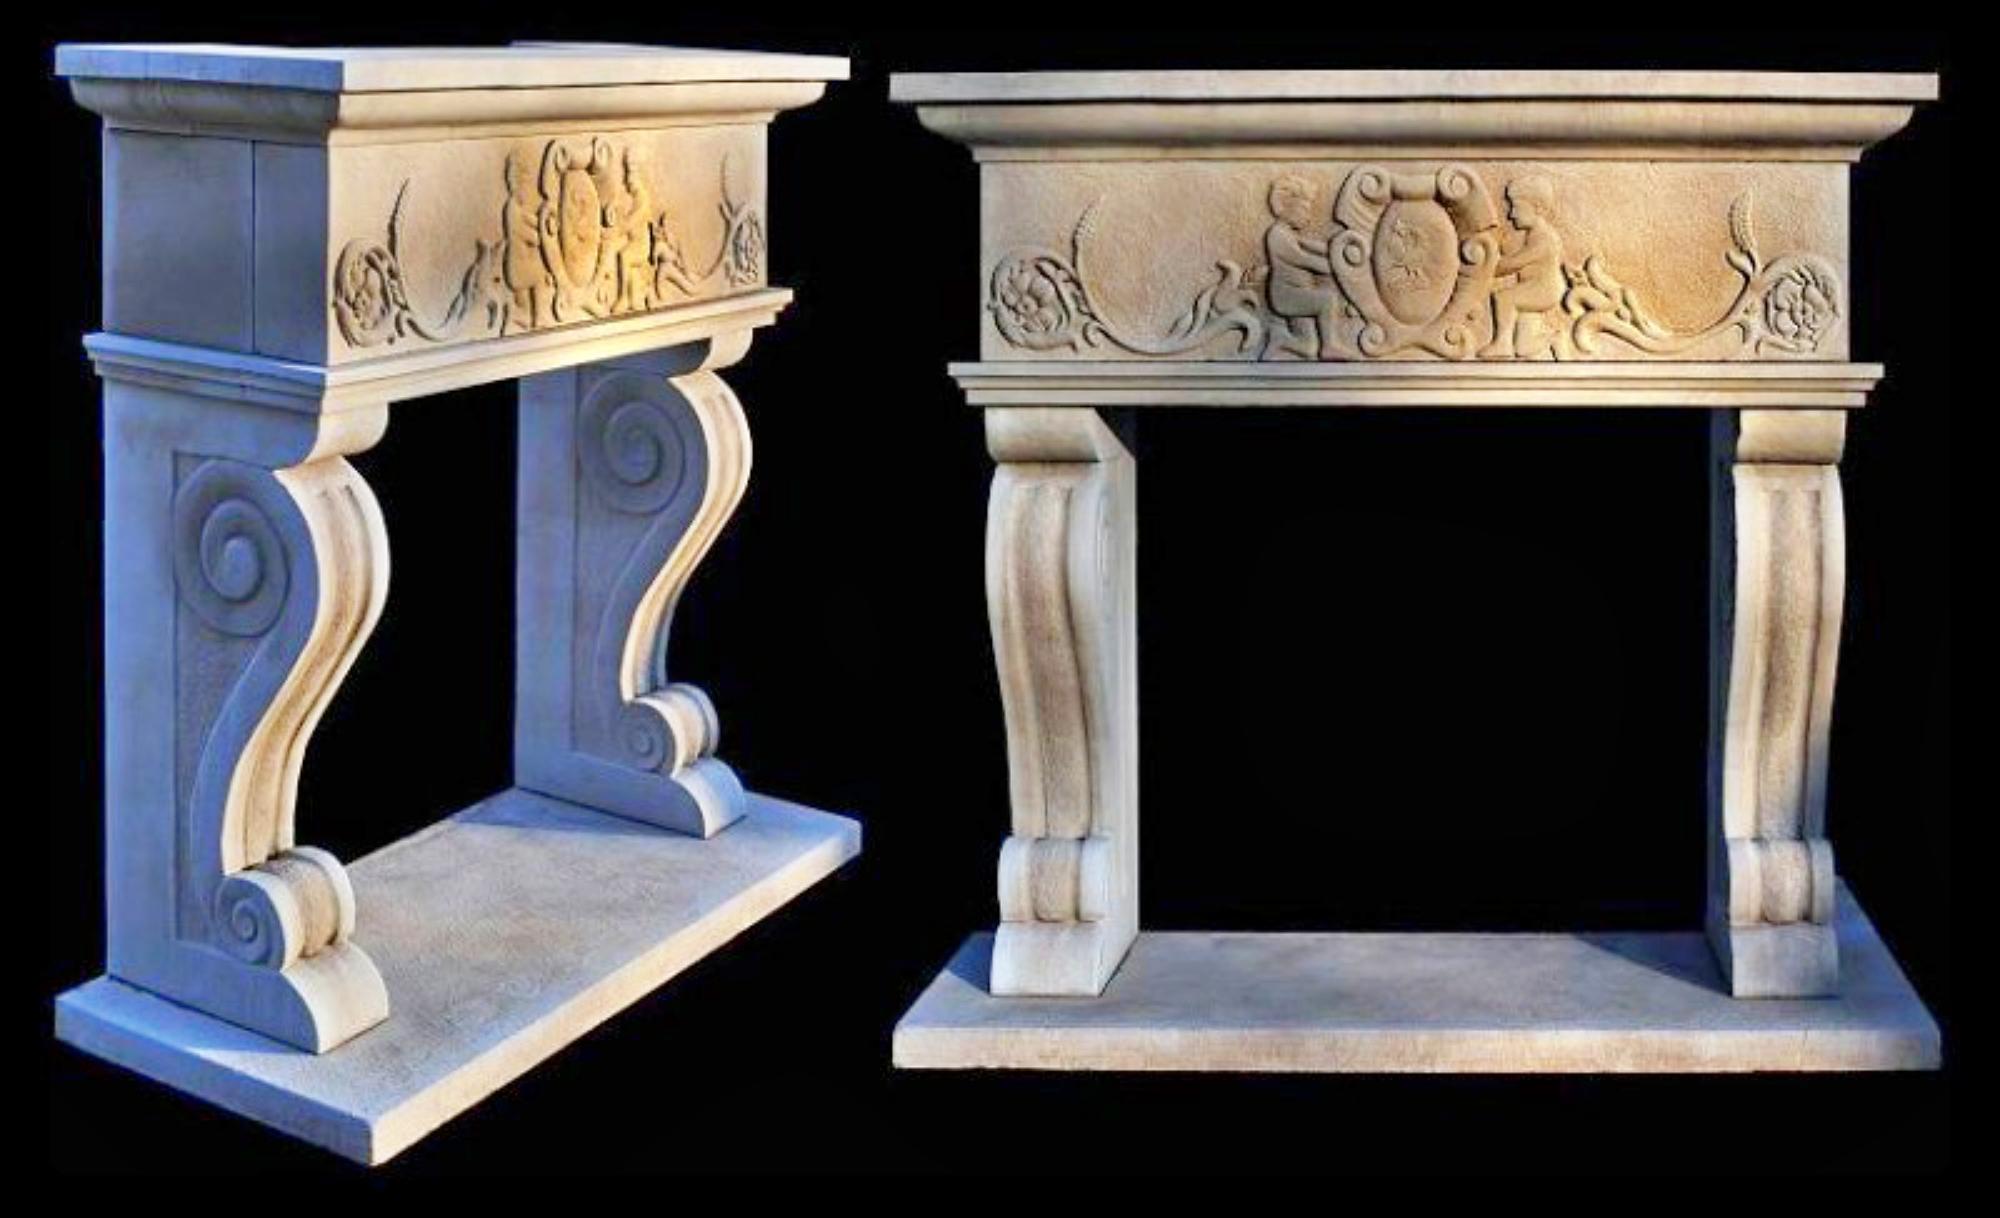 Fireplace with emblem and putti
Stone Serena
Early 20th century
Measures: Height 112 cm
Width 135 cm
Depth 45 cm
Weight 350 kg
Material Pietra serena / Sand-stone
very good condition.